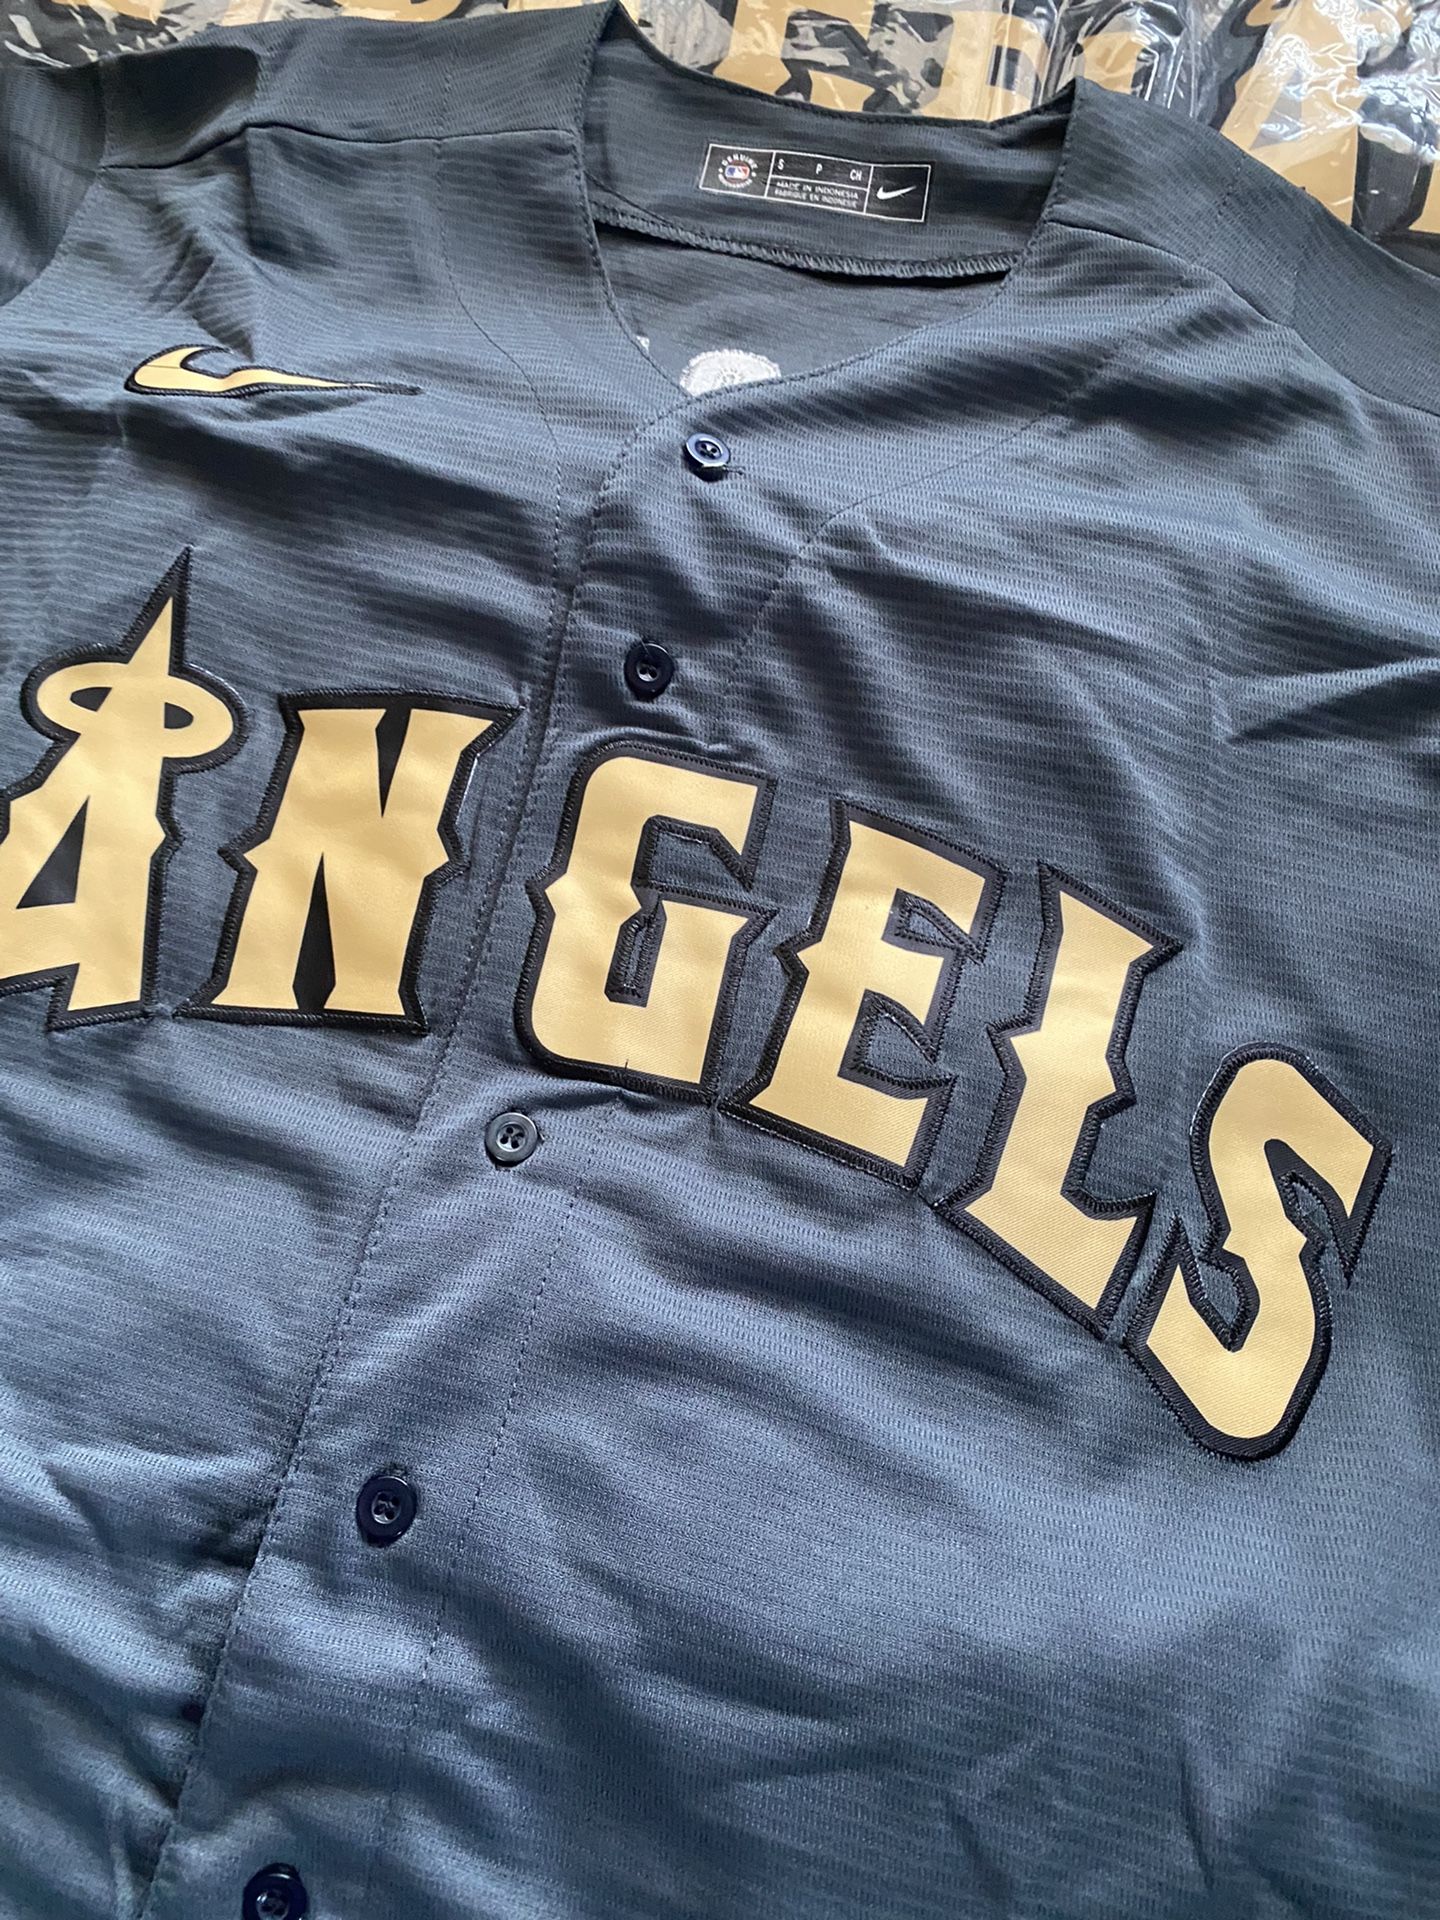 los angeles angels all star jersey